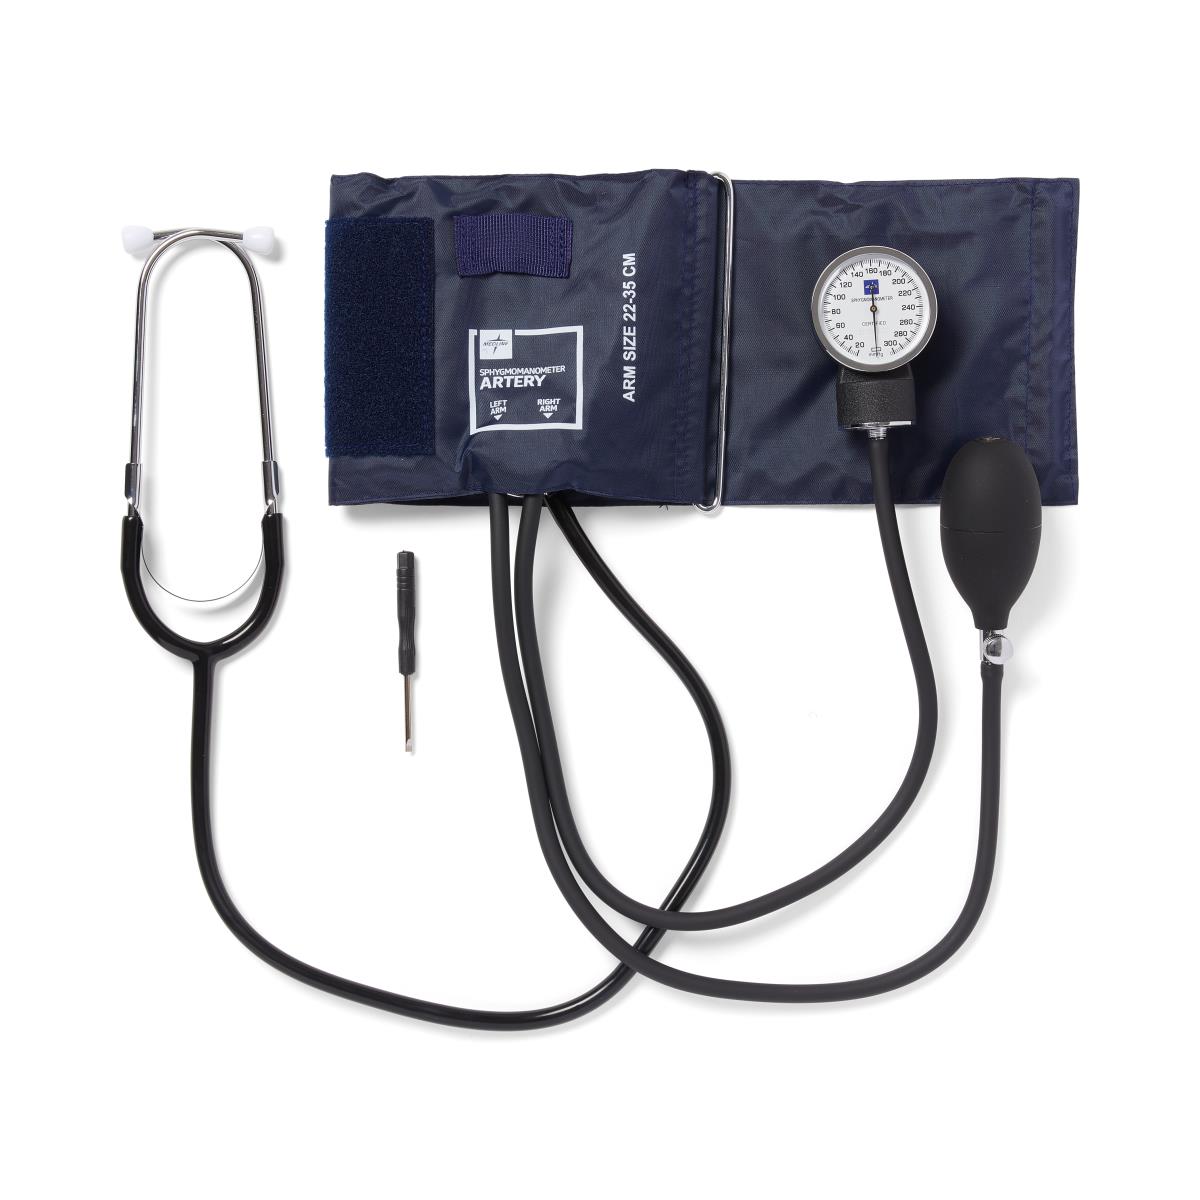 Manual Home Blood Pressure Kit with Attached Stethoscope